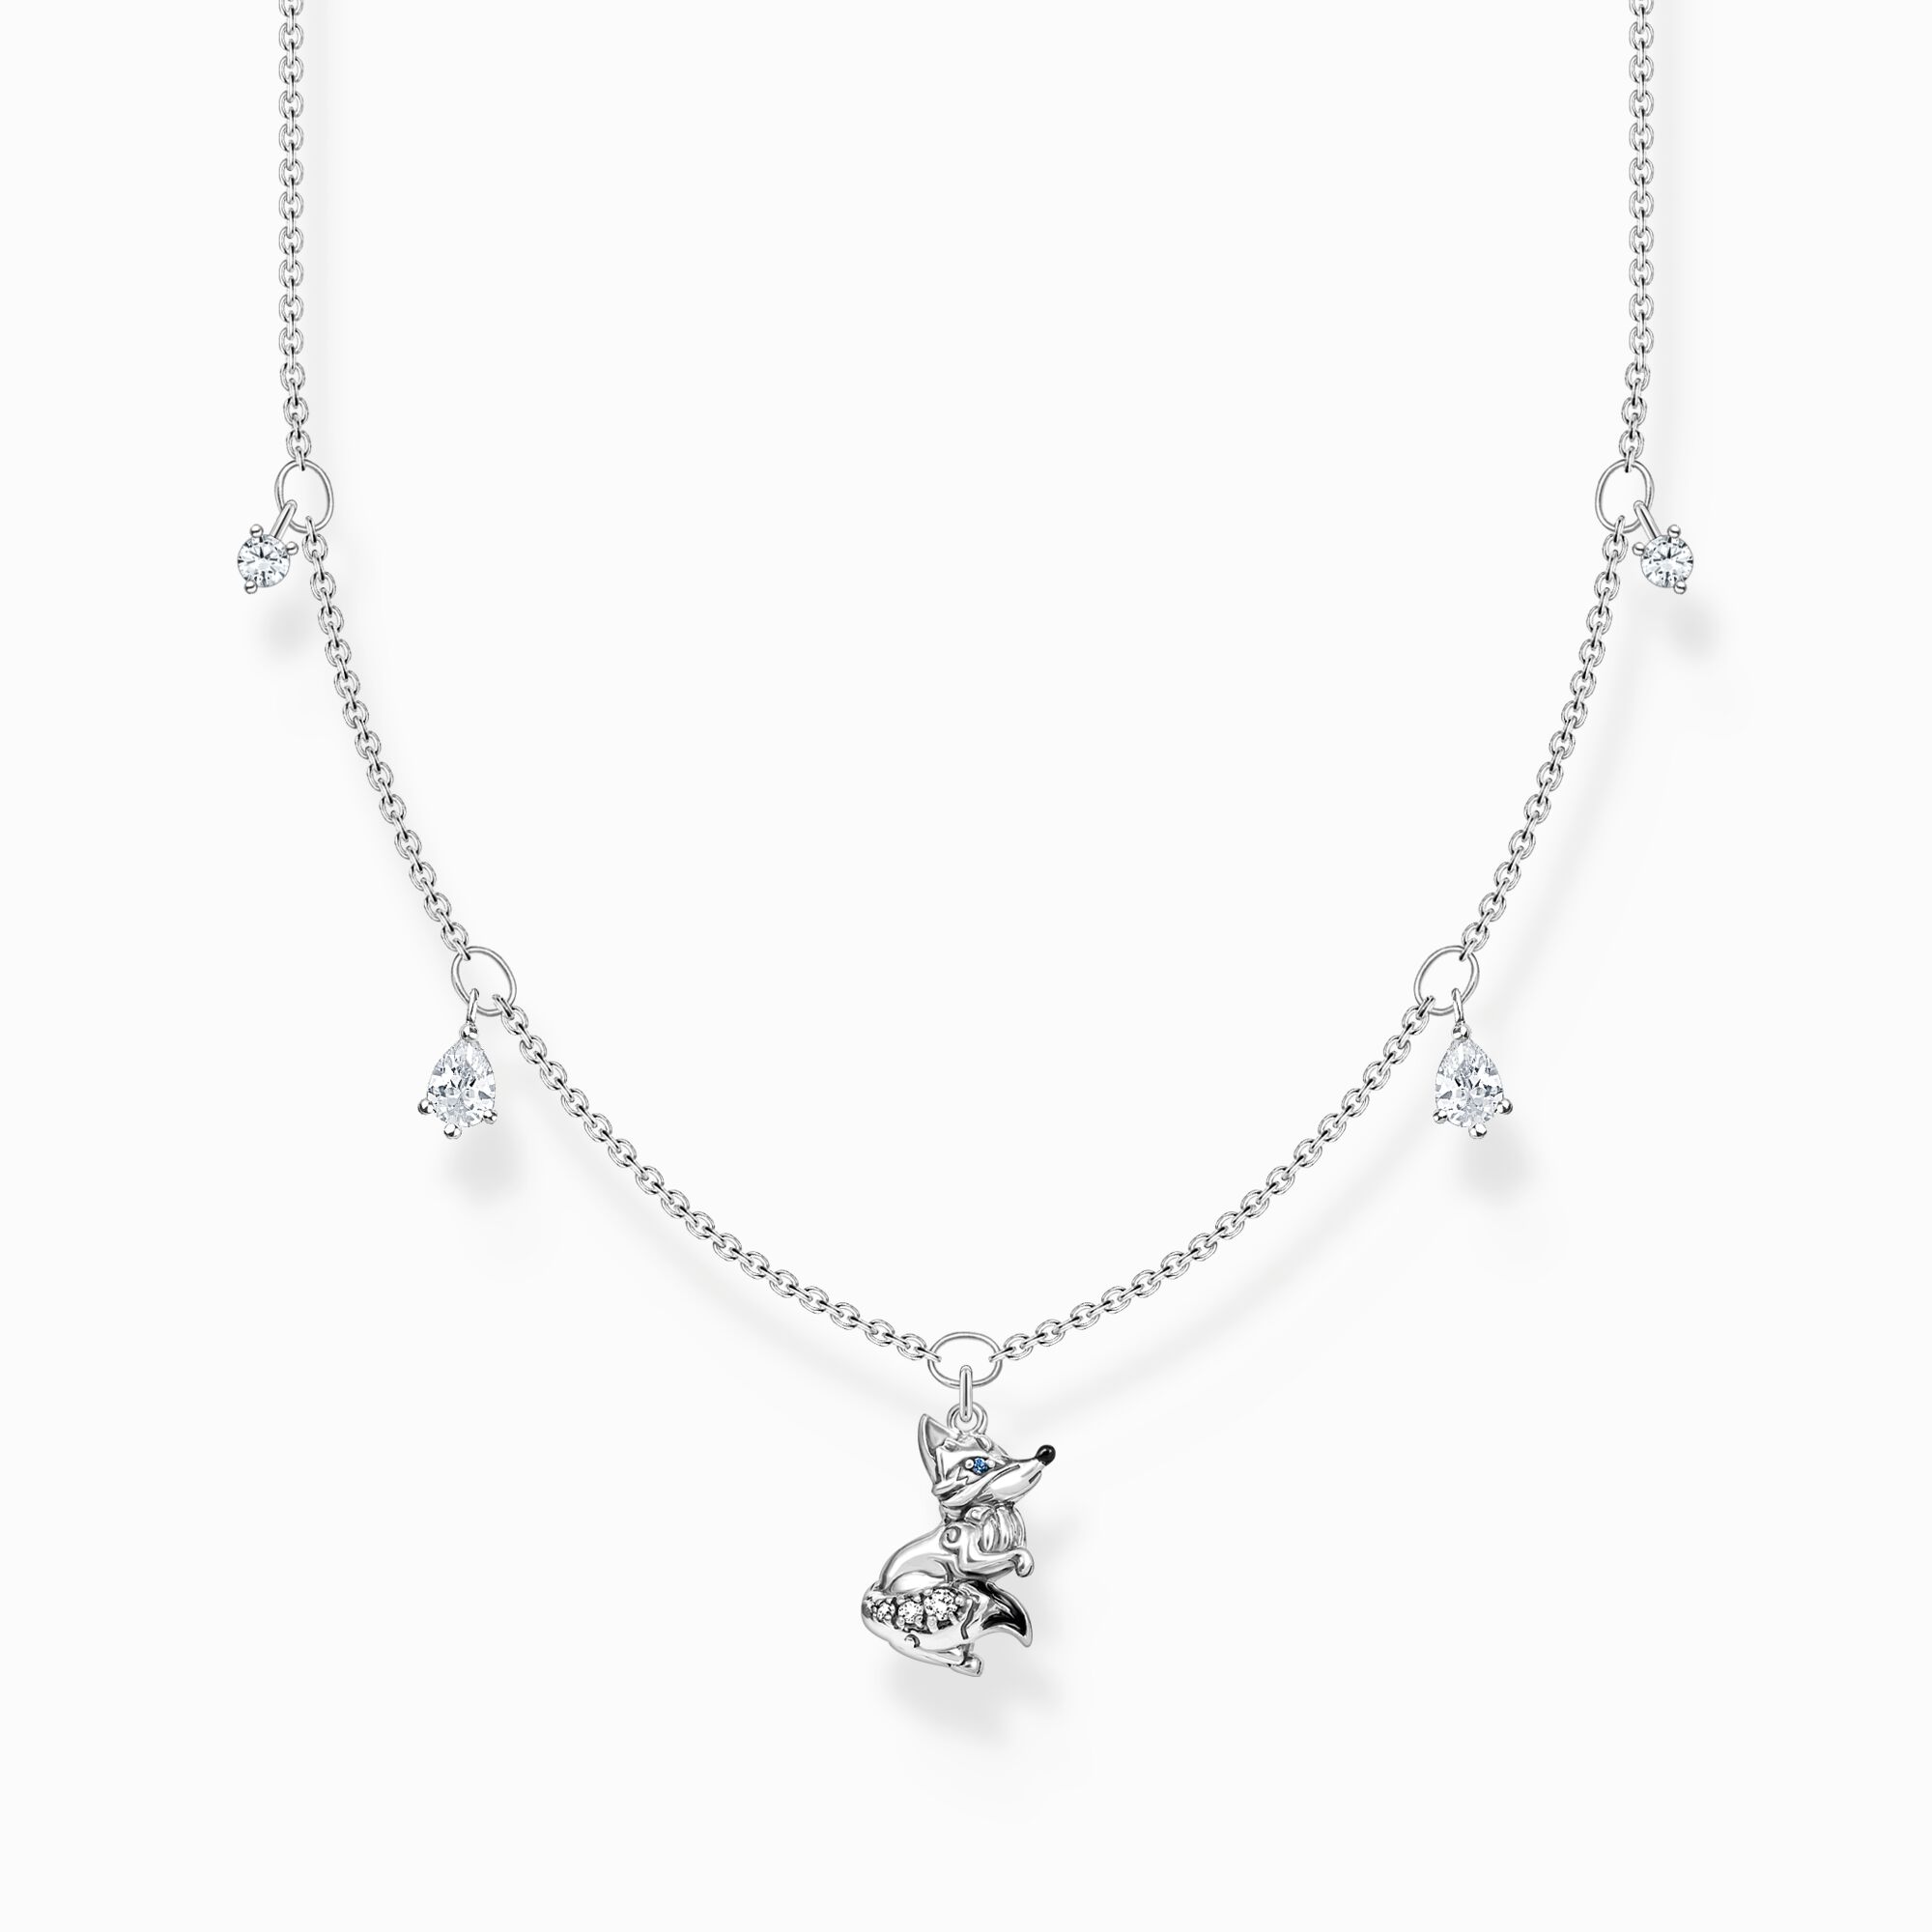 Necklace fox with white stones silver from the Charming Collection collection in the THOMAS SABO online store